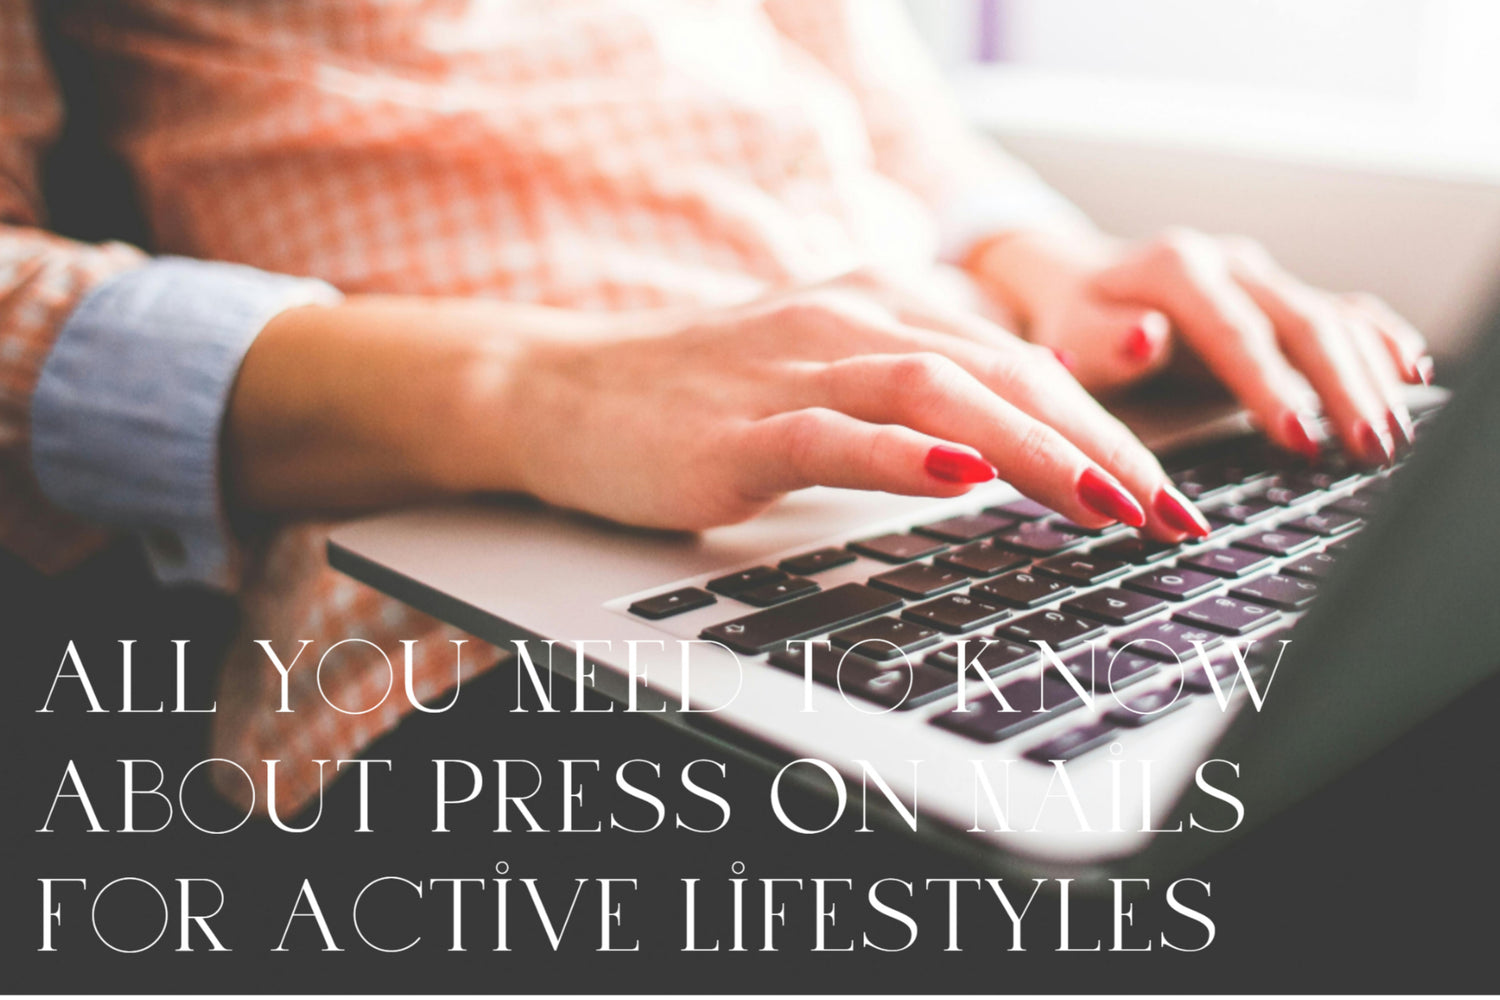 All You Need To Know About Press On Nails For Active Lifestyles